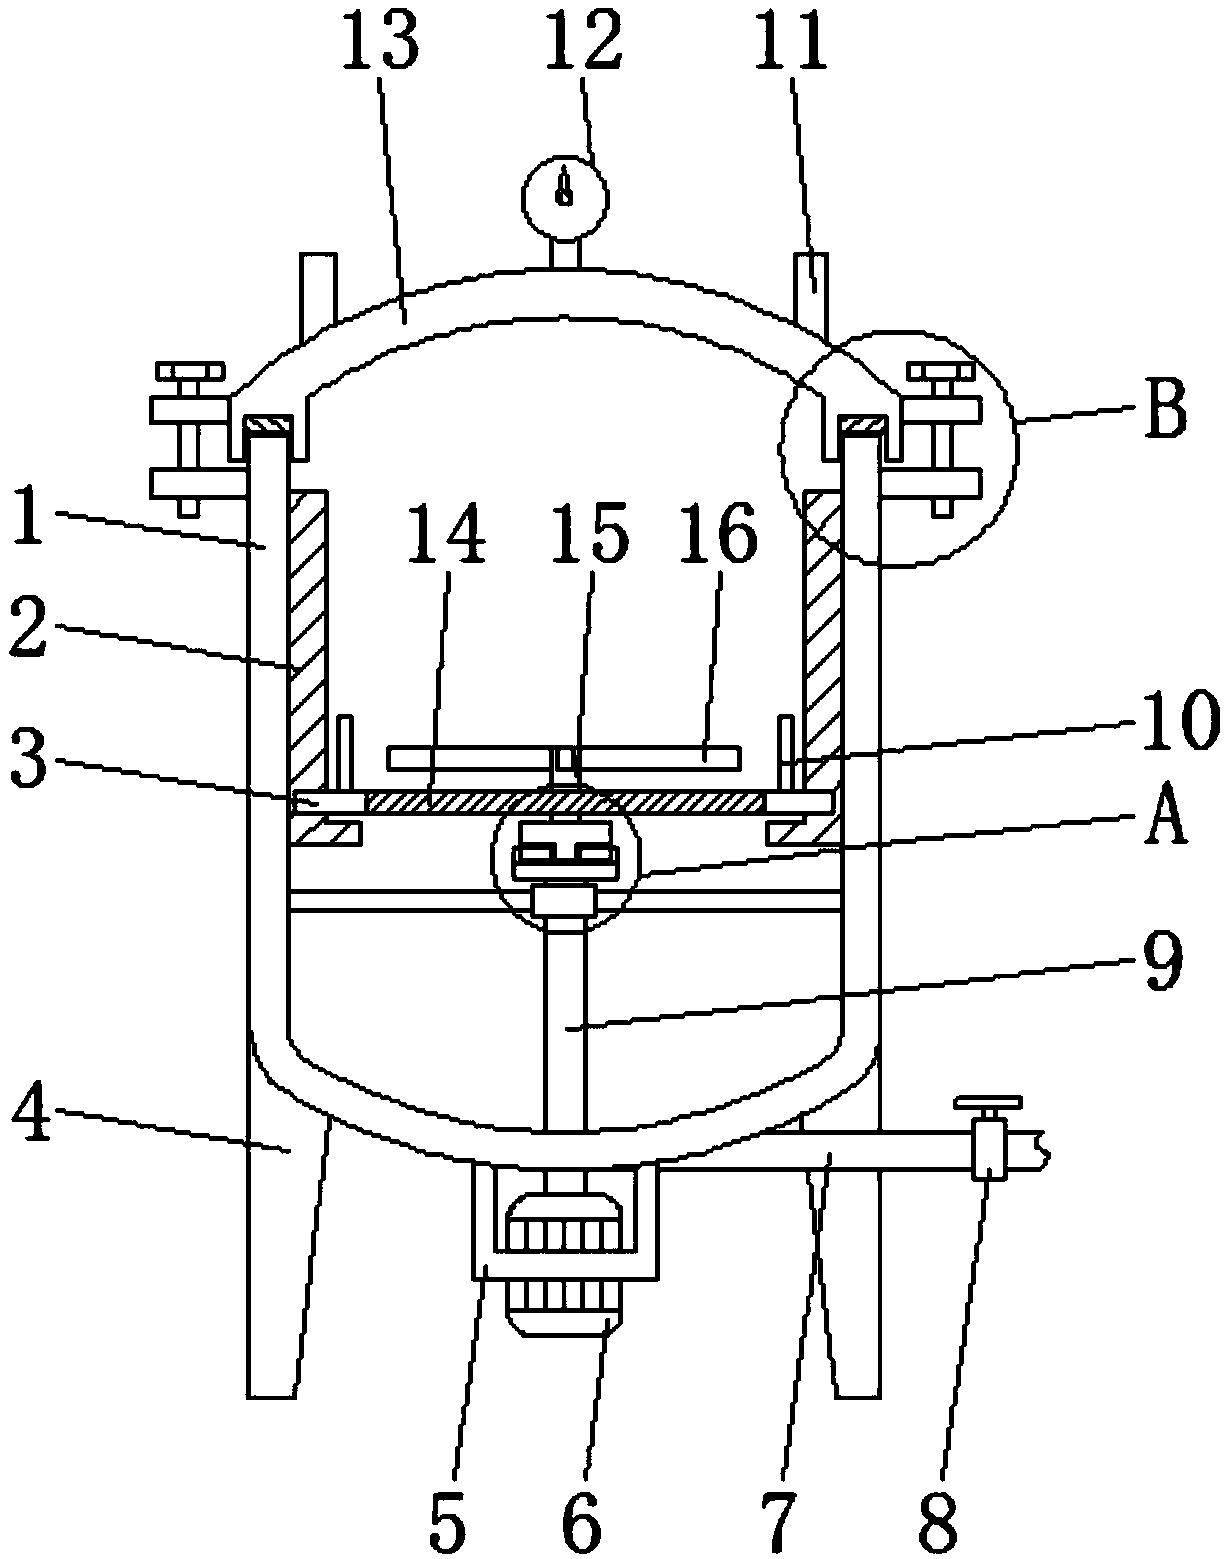 Device specially used for fermentation treatment of biological products